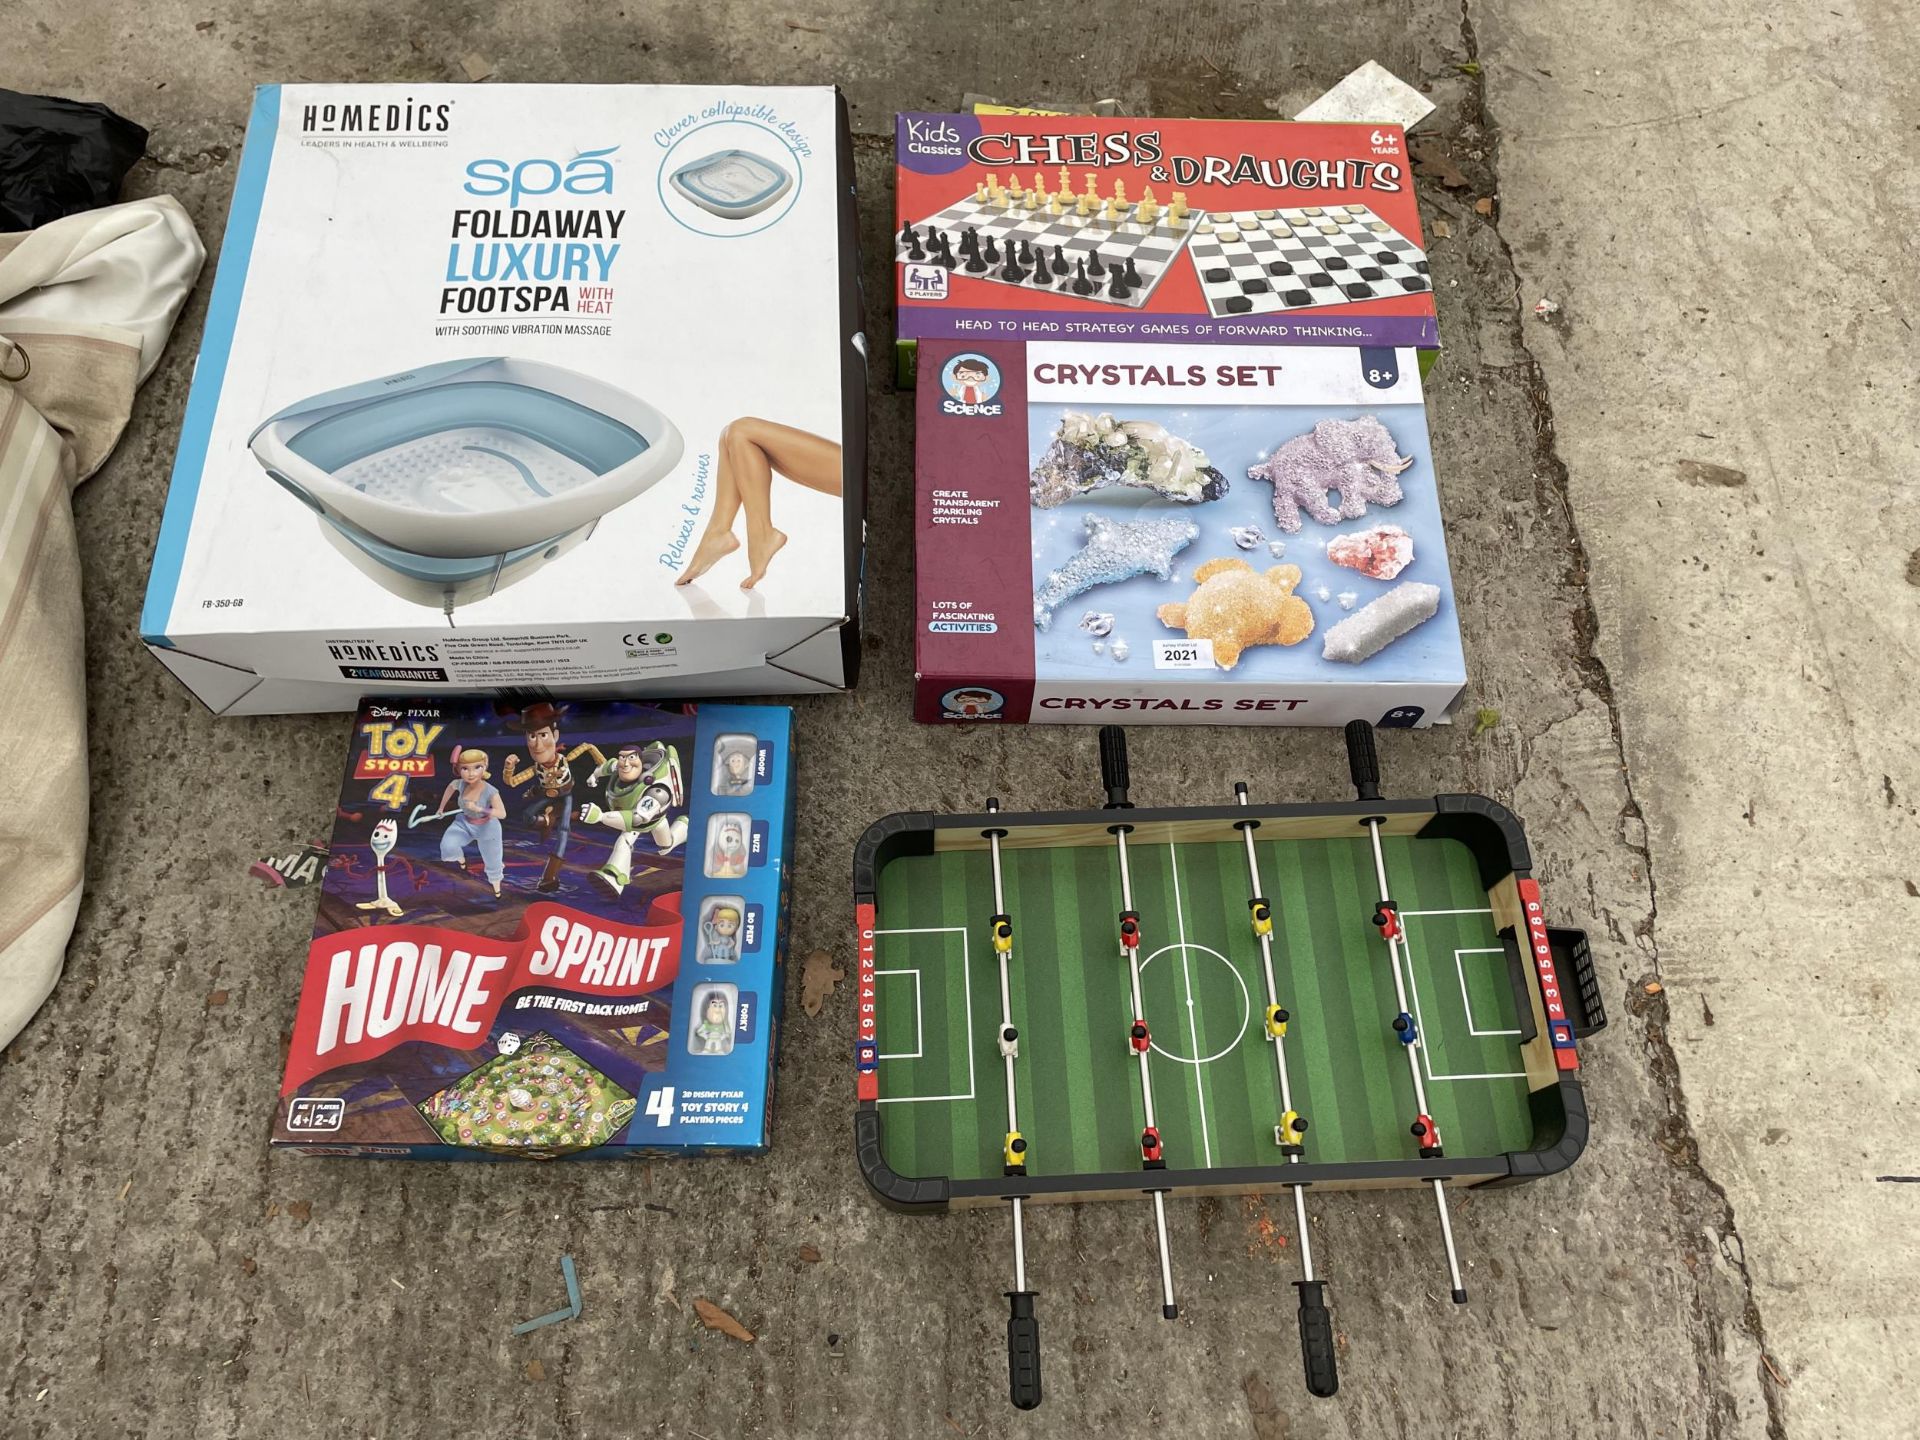 AN ASSORTMENT OF ITEMS TO INCLUDE A FOOT SPA, MINIATURE TABLE FOOTBALL AND A CRYSTALS SET ETC